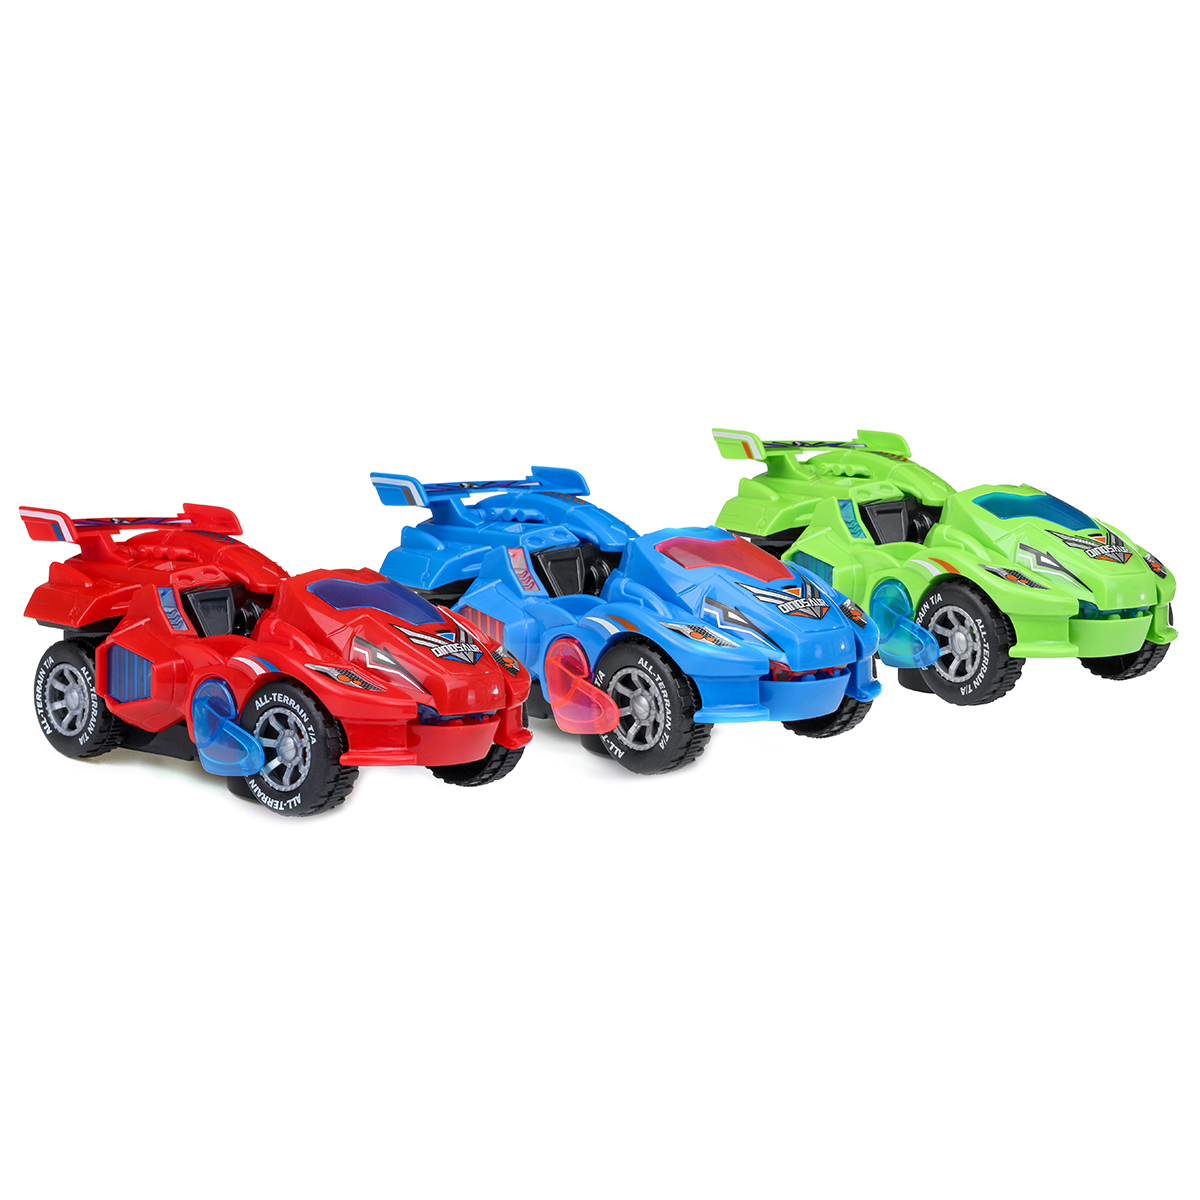 Creative-Dinosaur-Deformation-Toy-Car-Puzzle-Dinosaur-Electric-Toy-Car-Light-and-Music-Electric-Defo-1757309-8